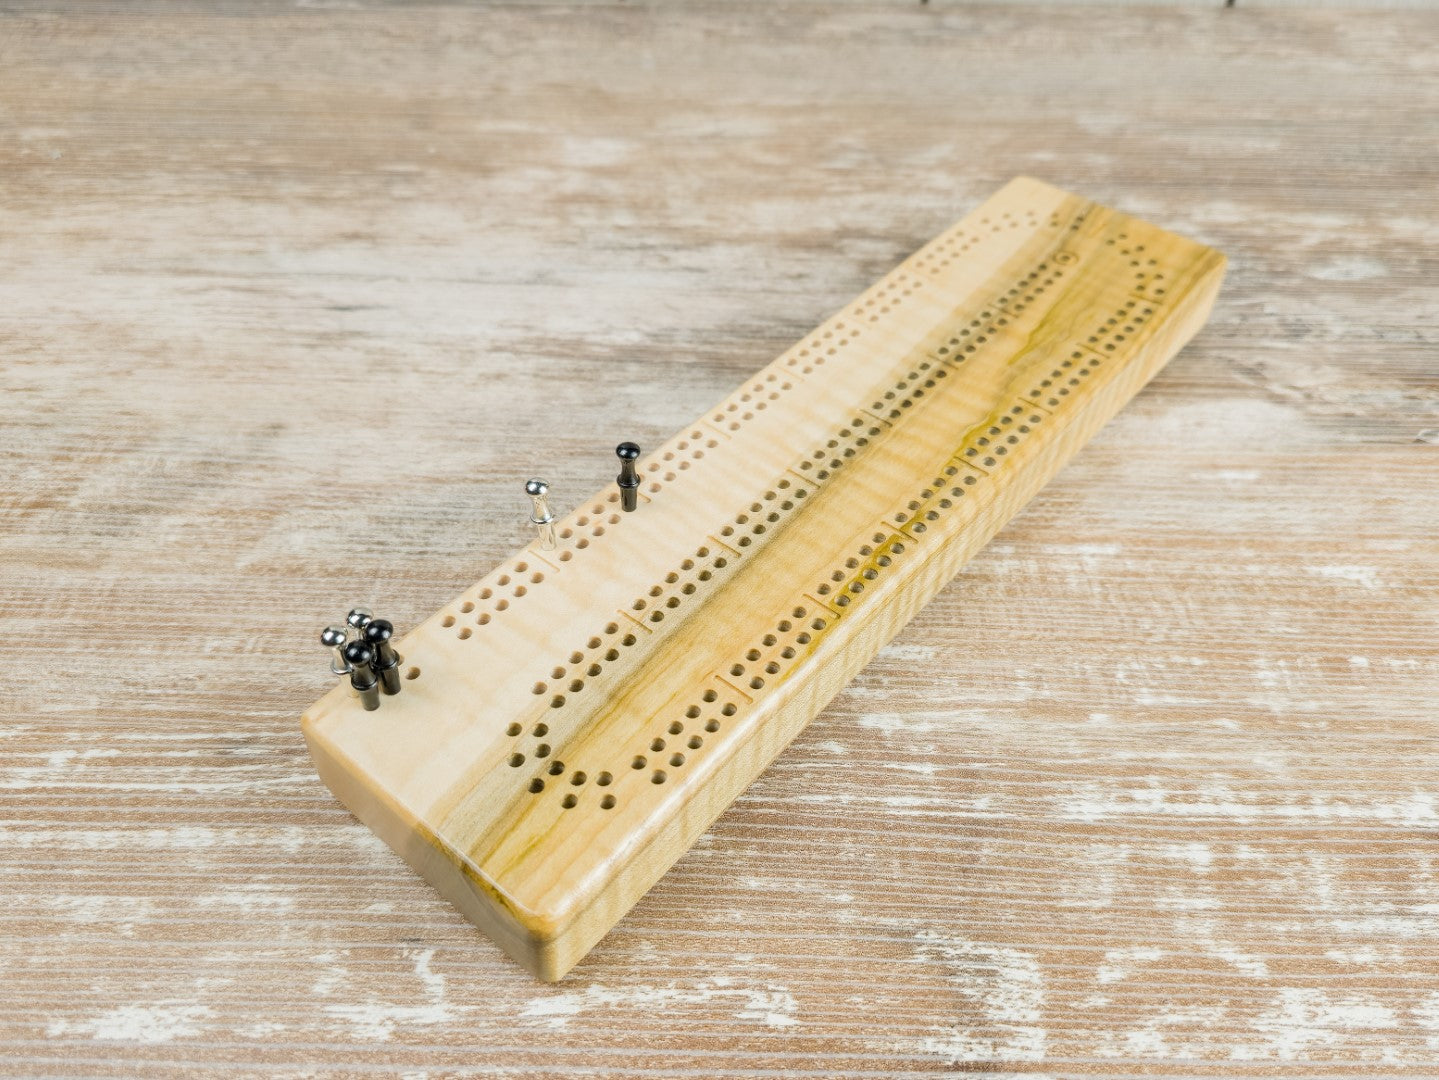 Mini Cribbage game board with pegs - Curly Maple #1